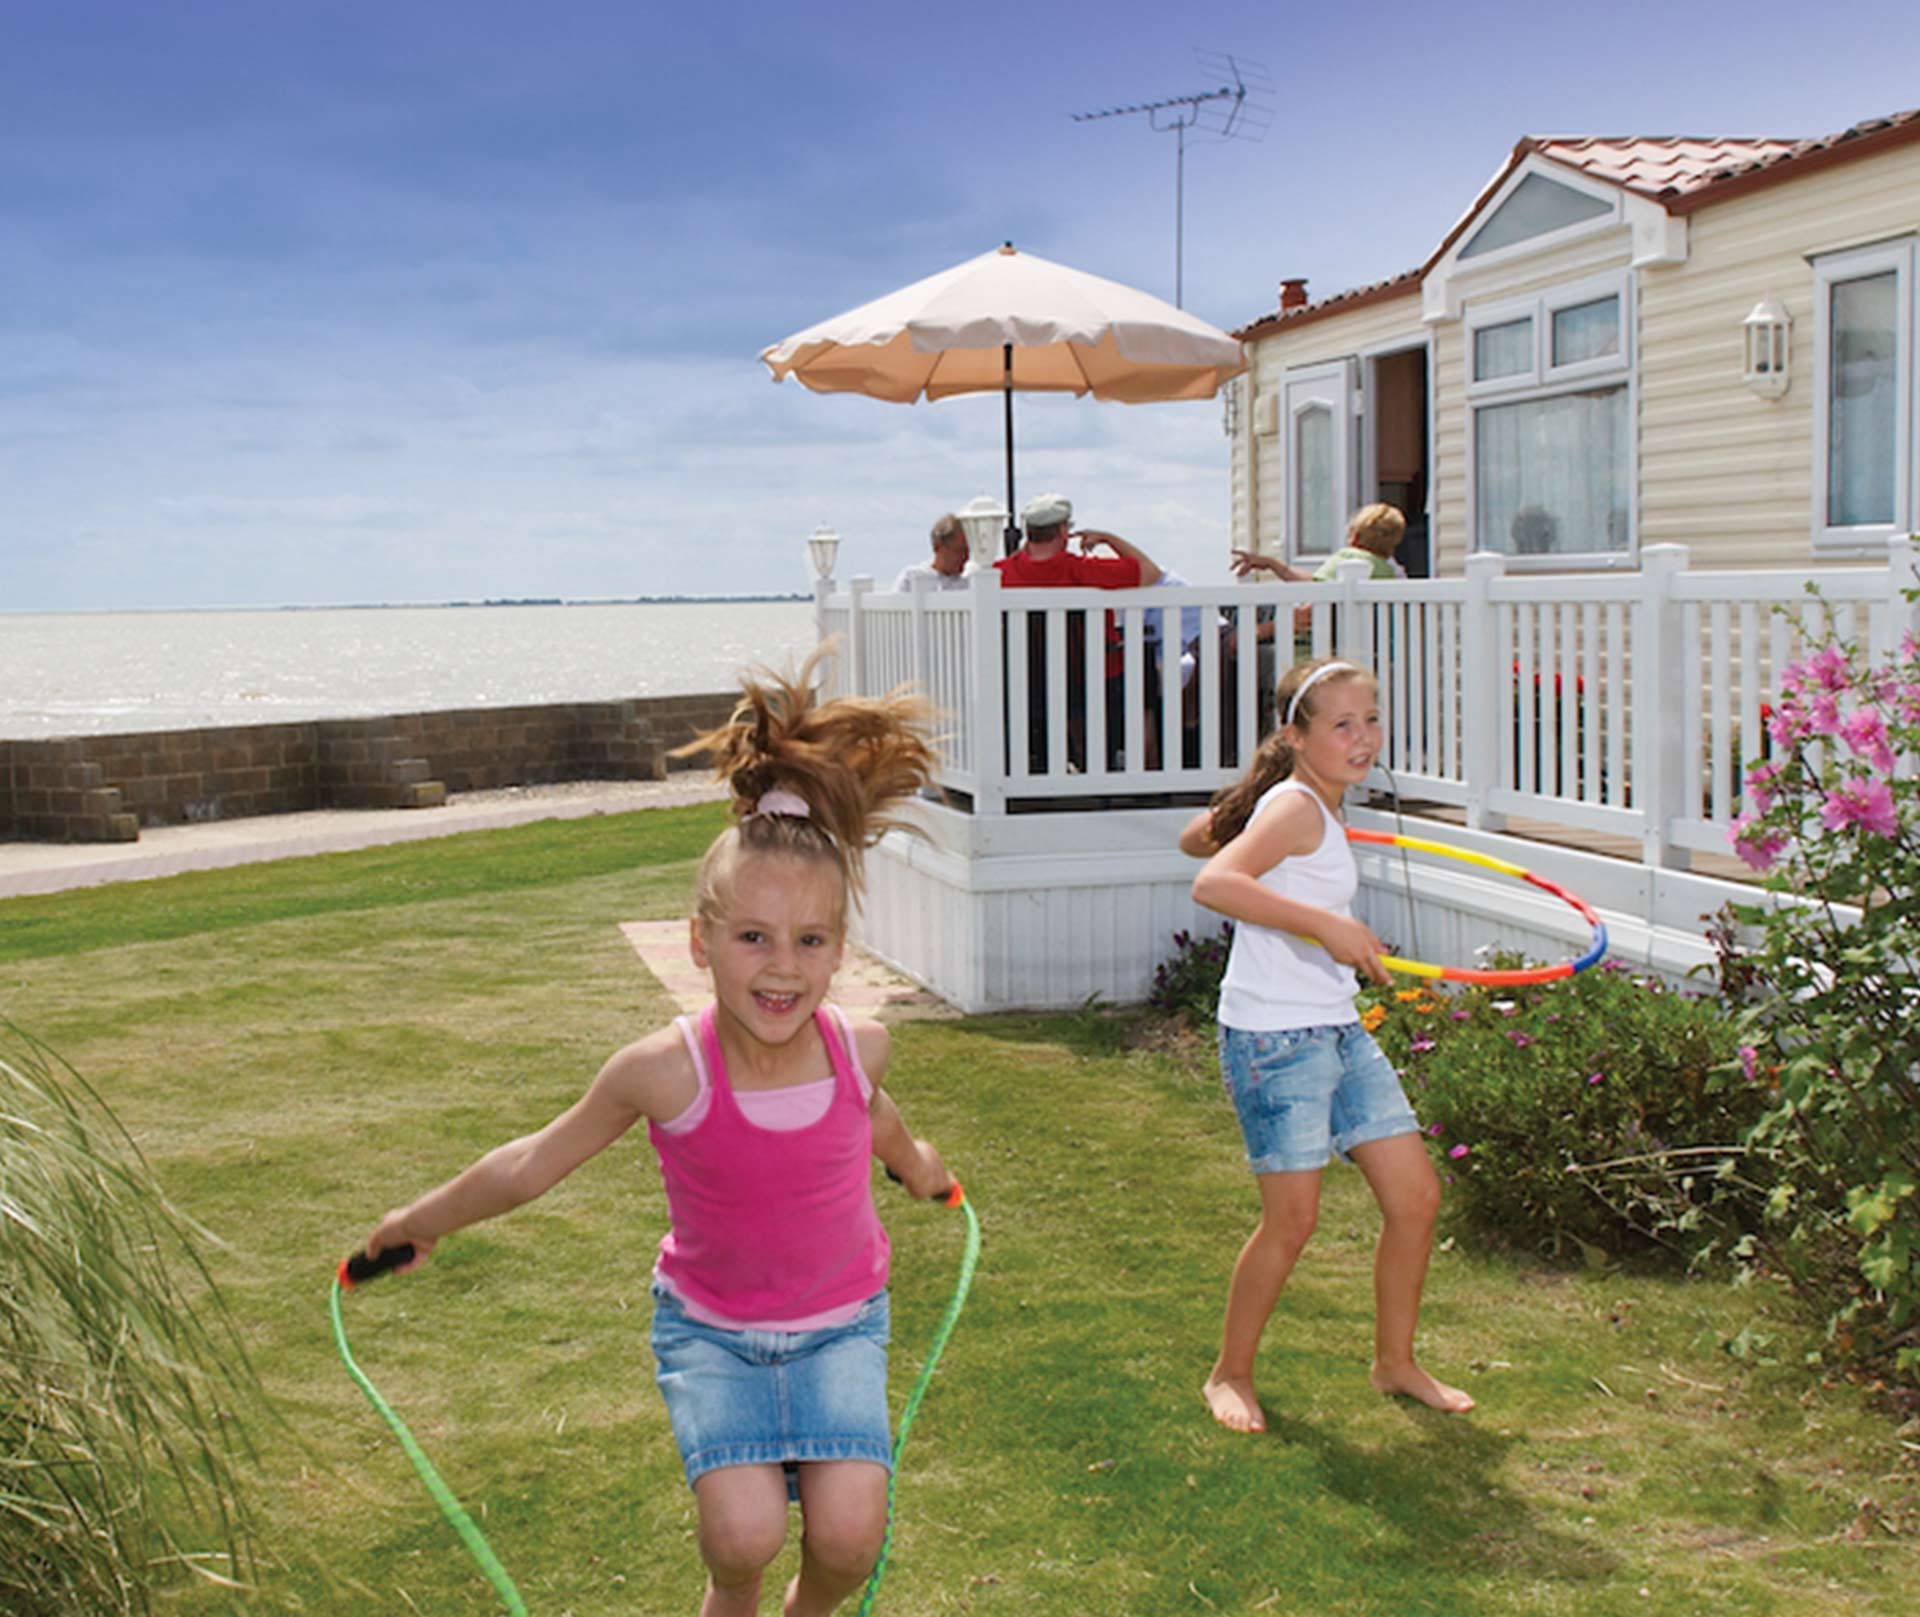 Top tips for your caravan holiday (including a smart solution for wet dog smell)